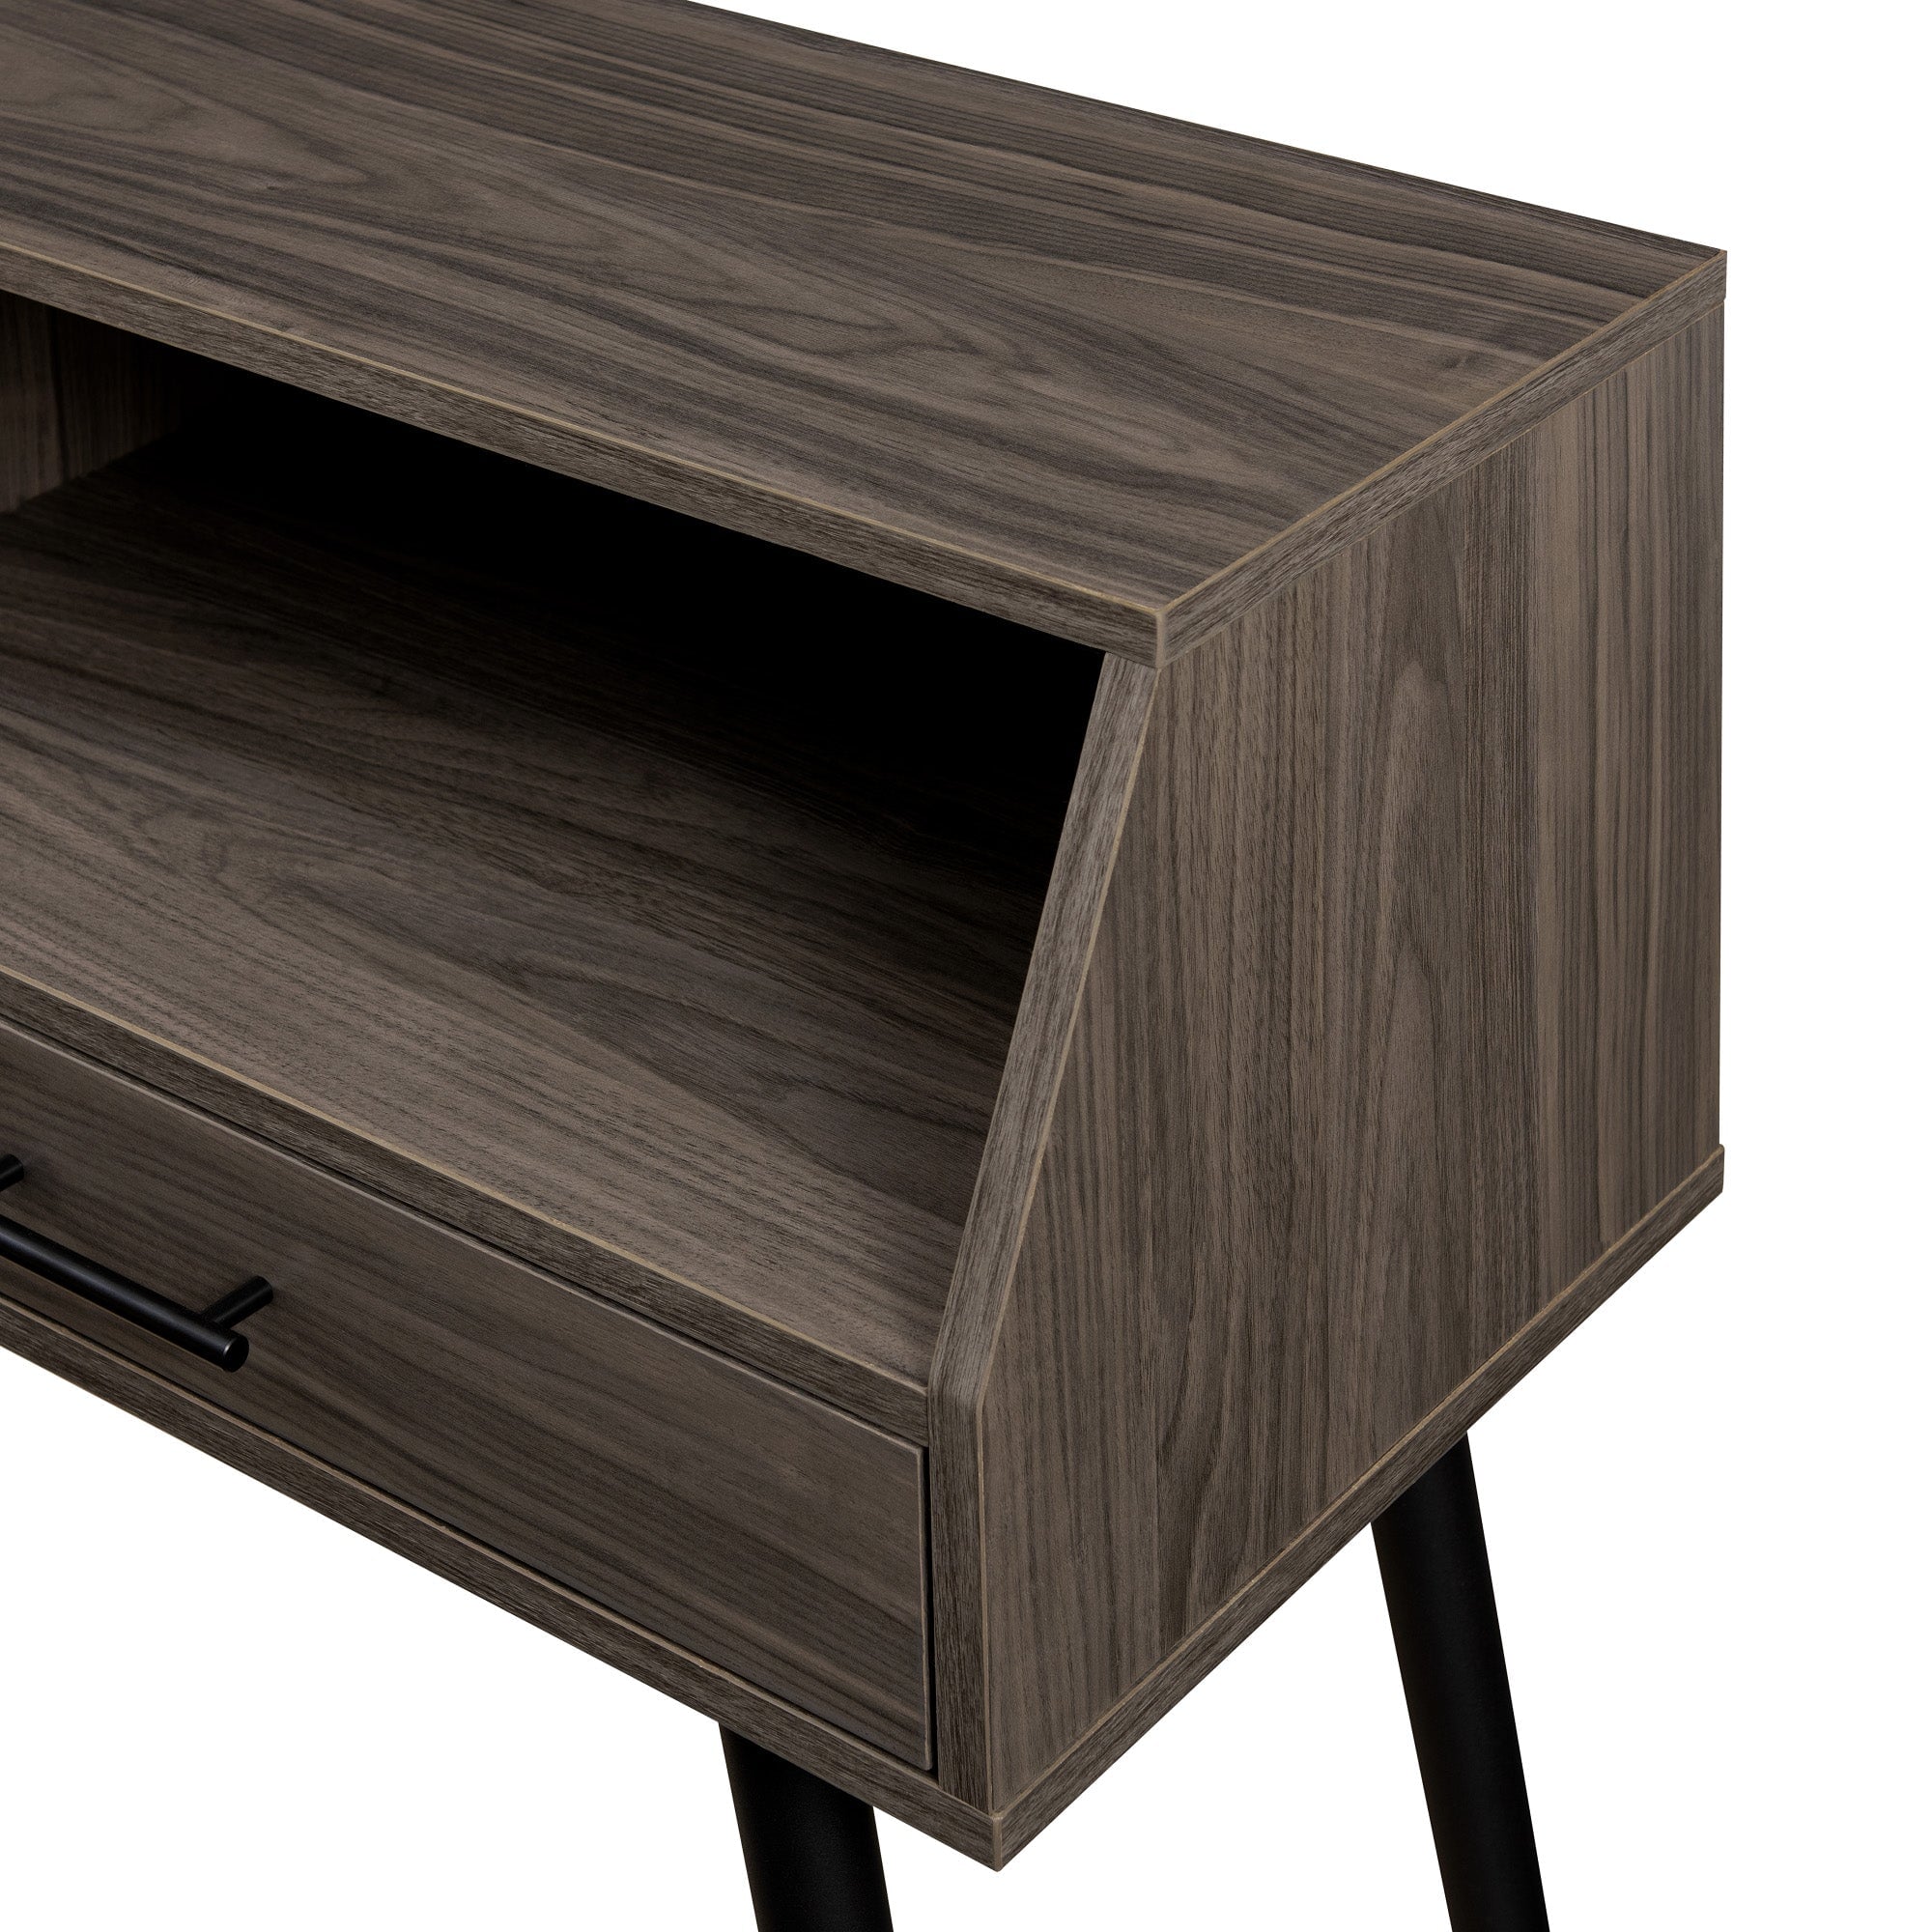 44" Contemporary 2-Drawer Entry Table